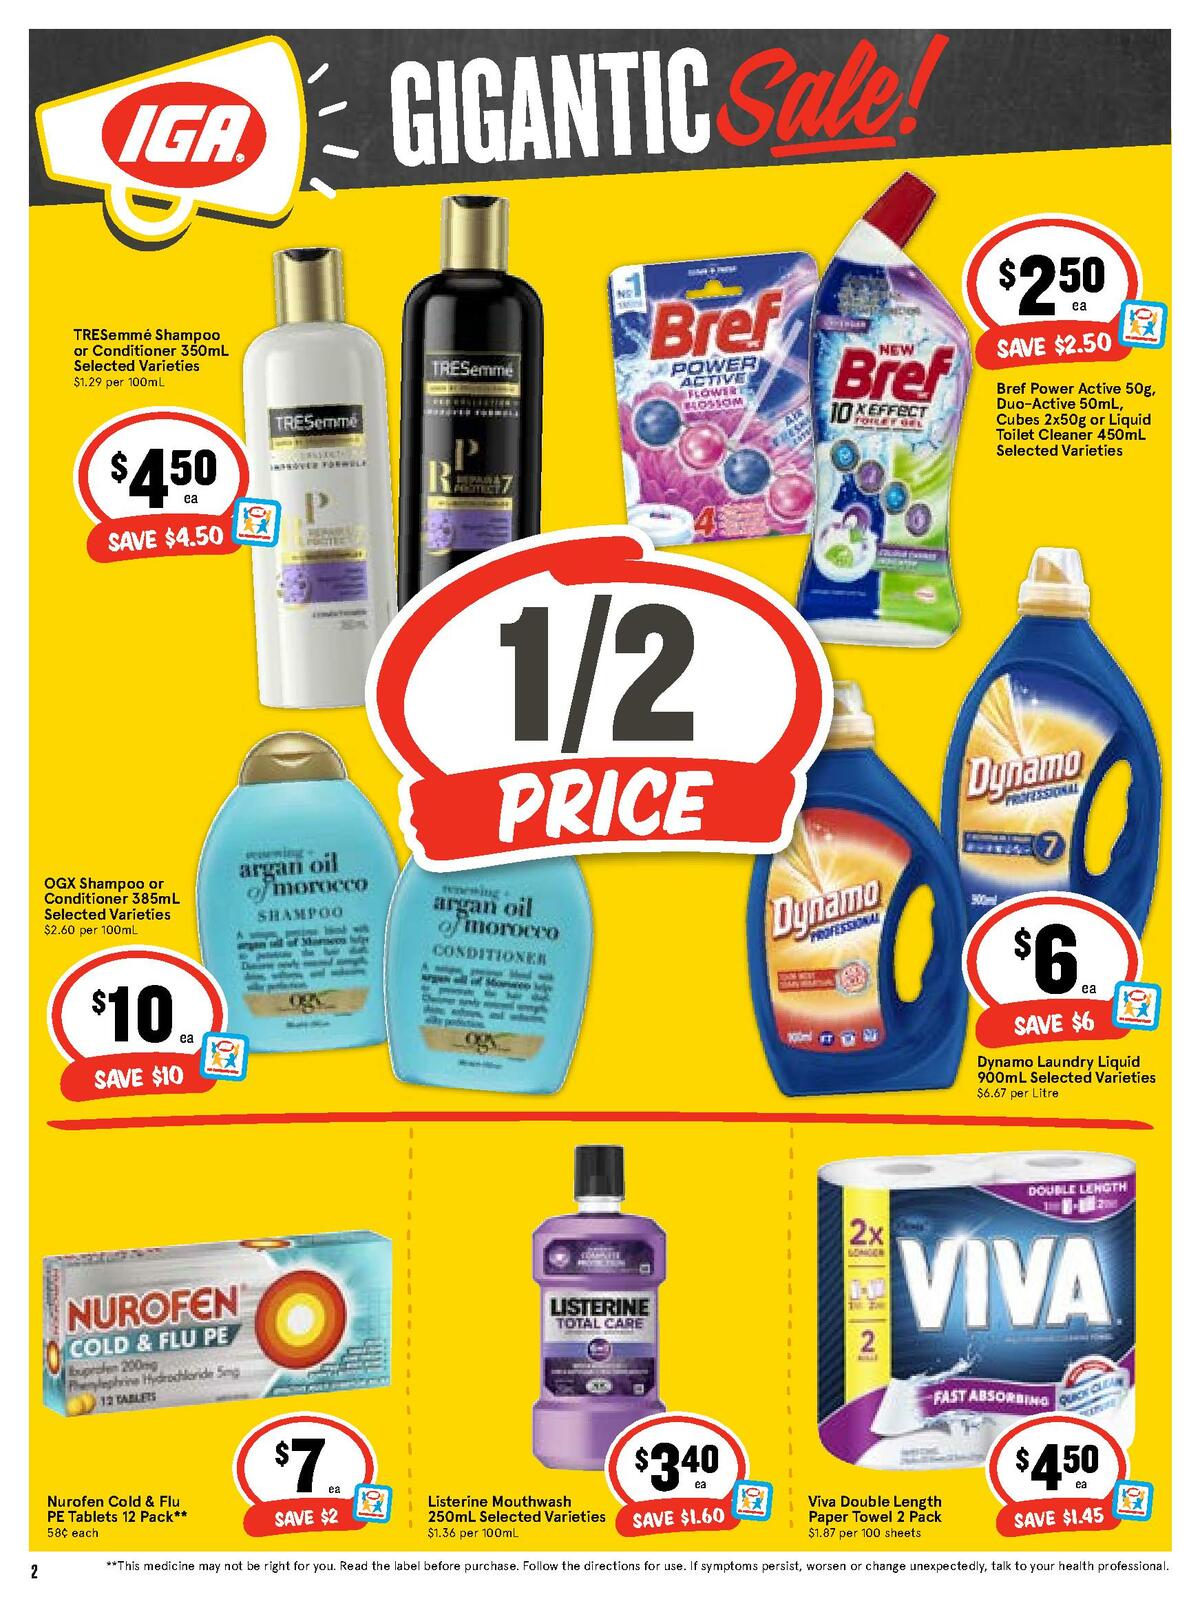 IGA Catalogues from 7 October